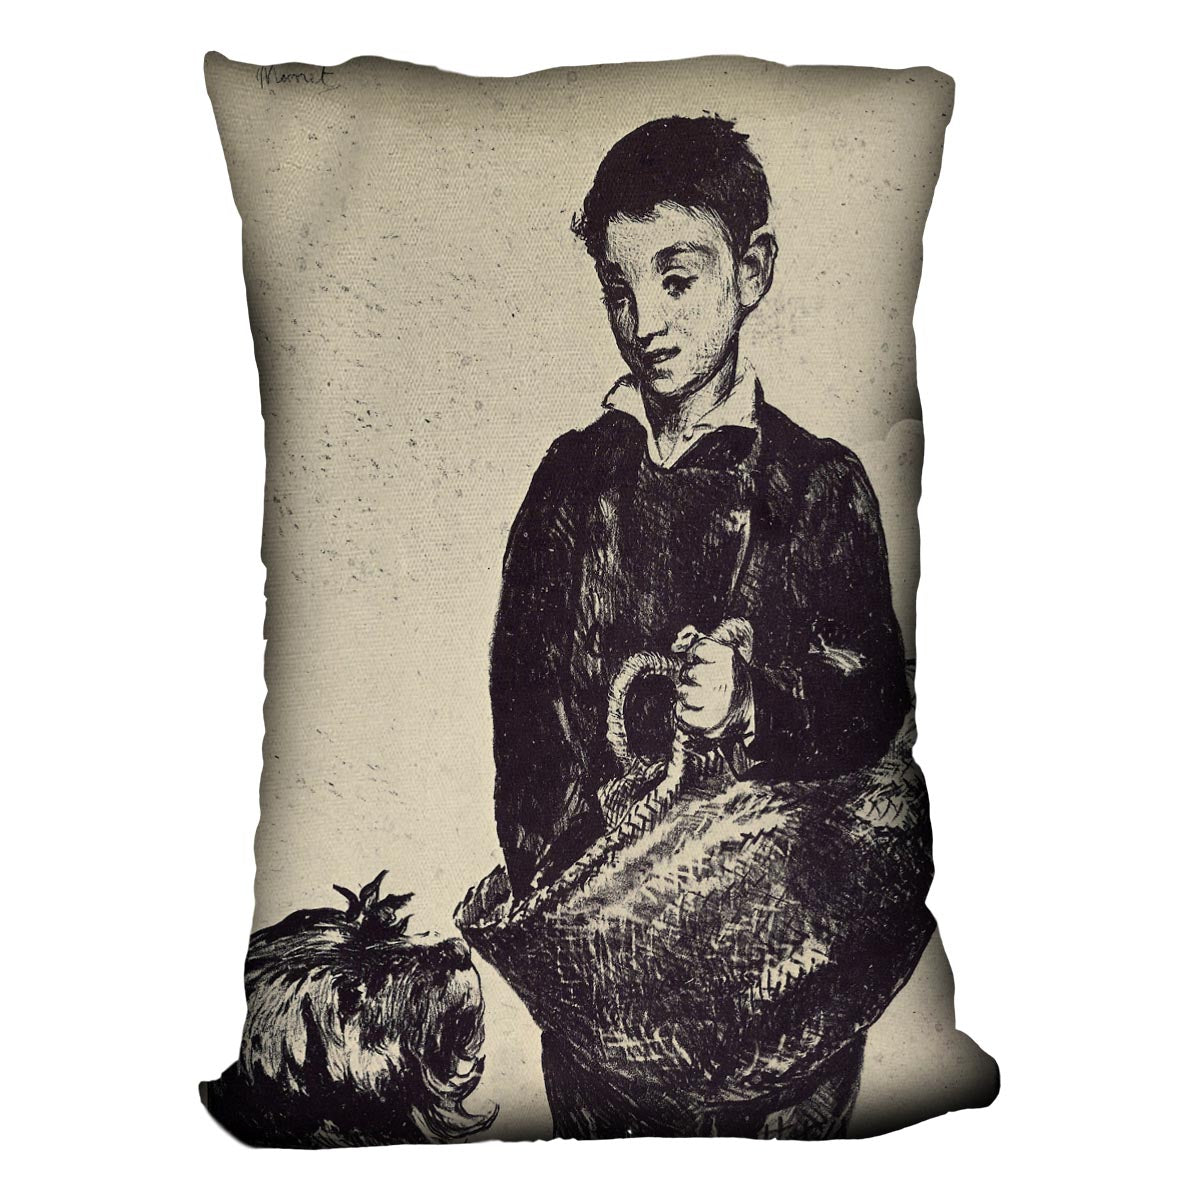 The urchin by Manet Cushion